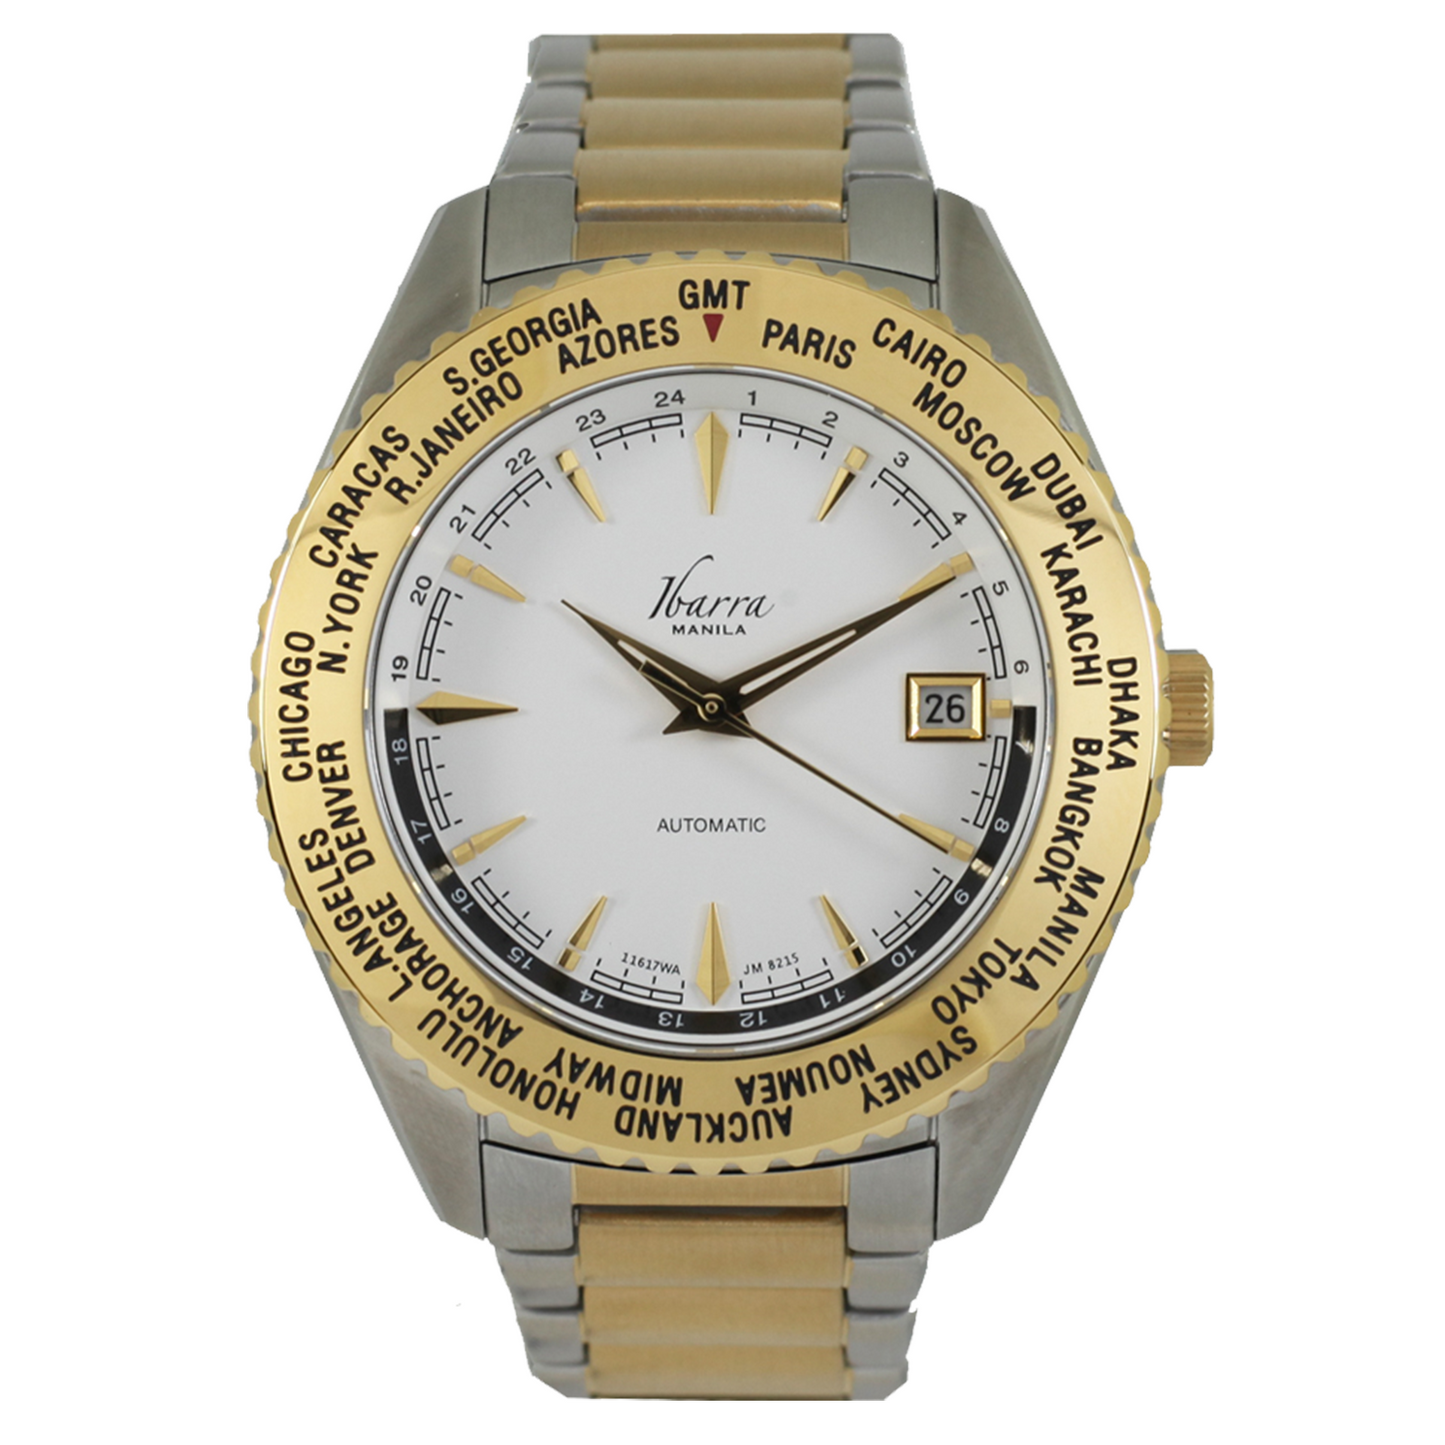 SALVADOR 40MM WORLD TIMER AUTOMATIC TWO-TONE DRESS WATCH (WHITE DIAL)